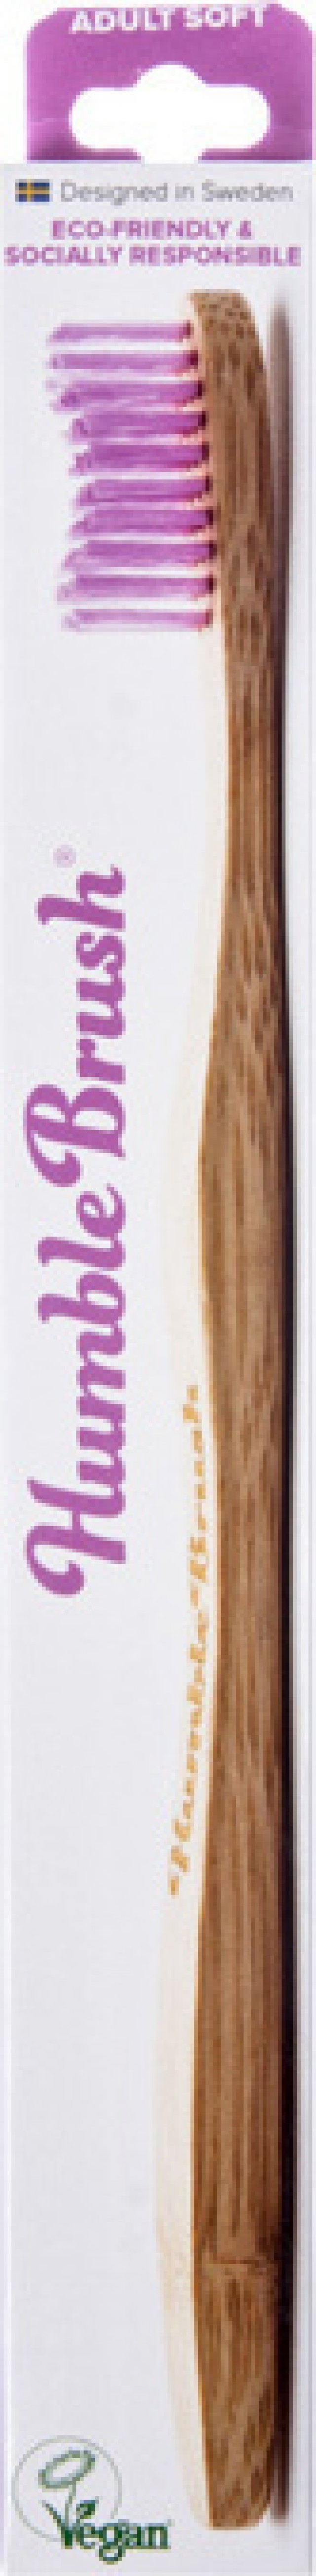 The Humble Co. Toothbrush Bamboo Purple Μωβ Οδοντόβουρτσα Απο Μπαμπού Adult Soft 1 τμχ product photo